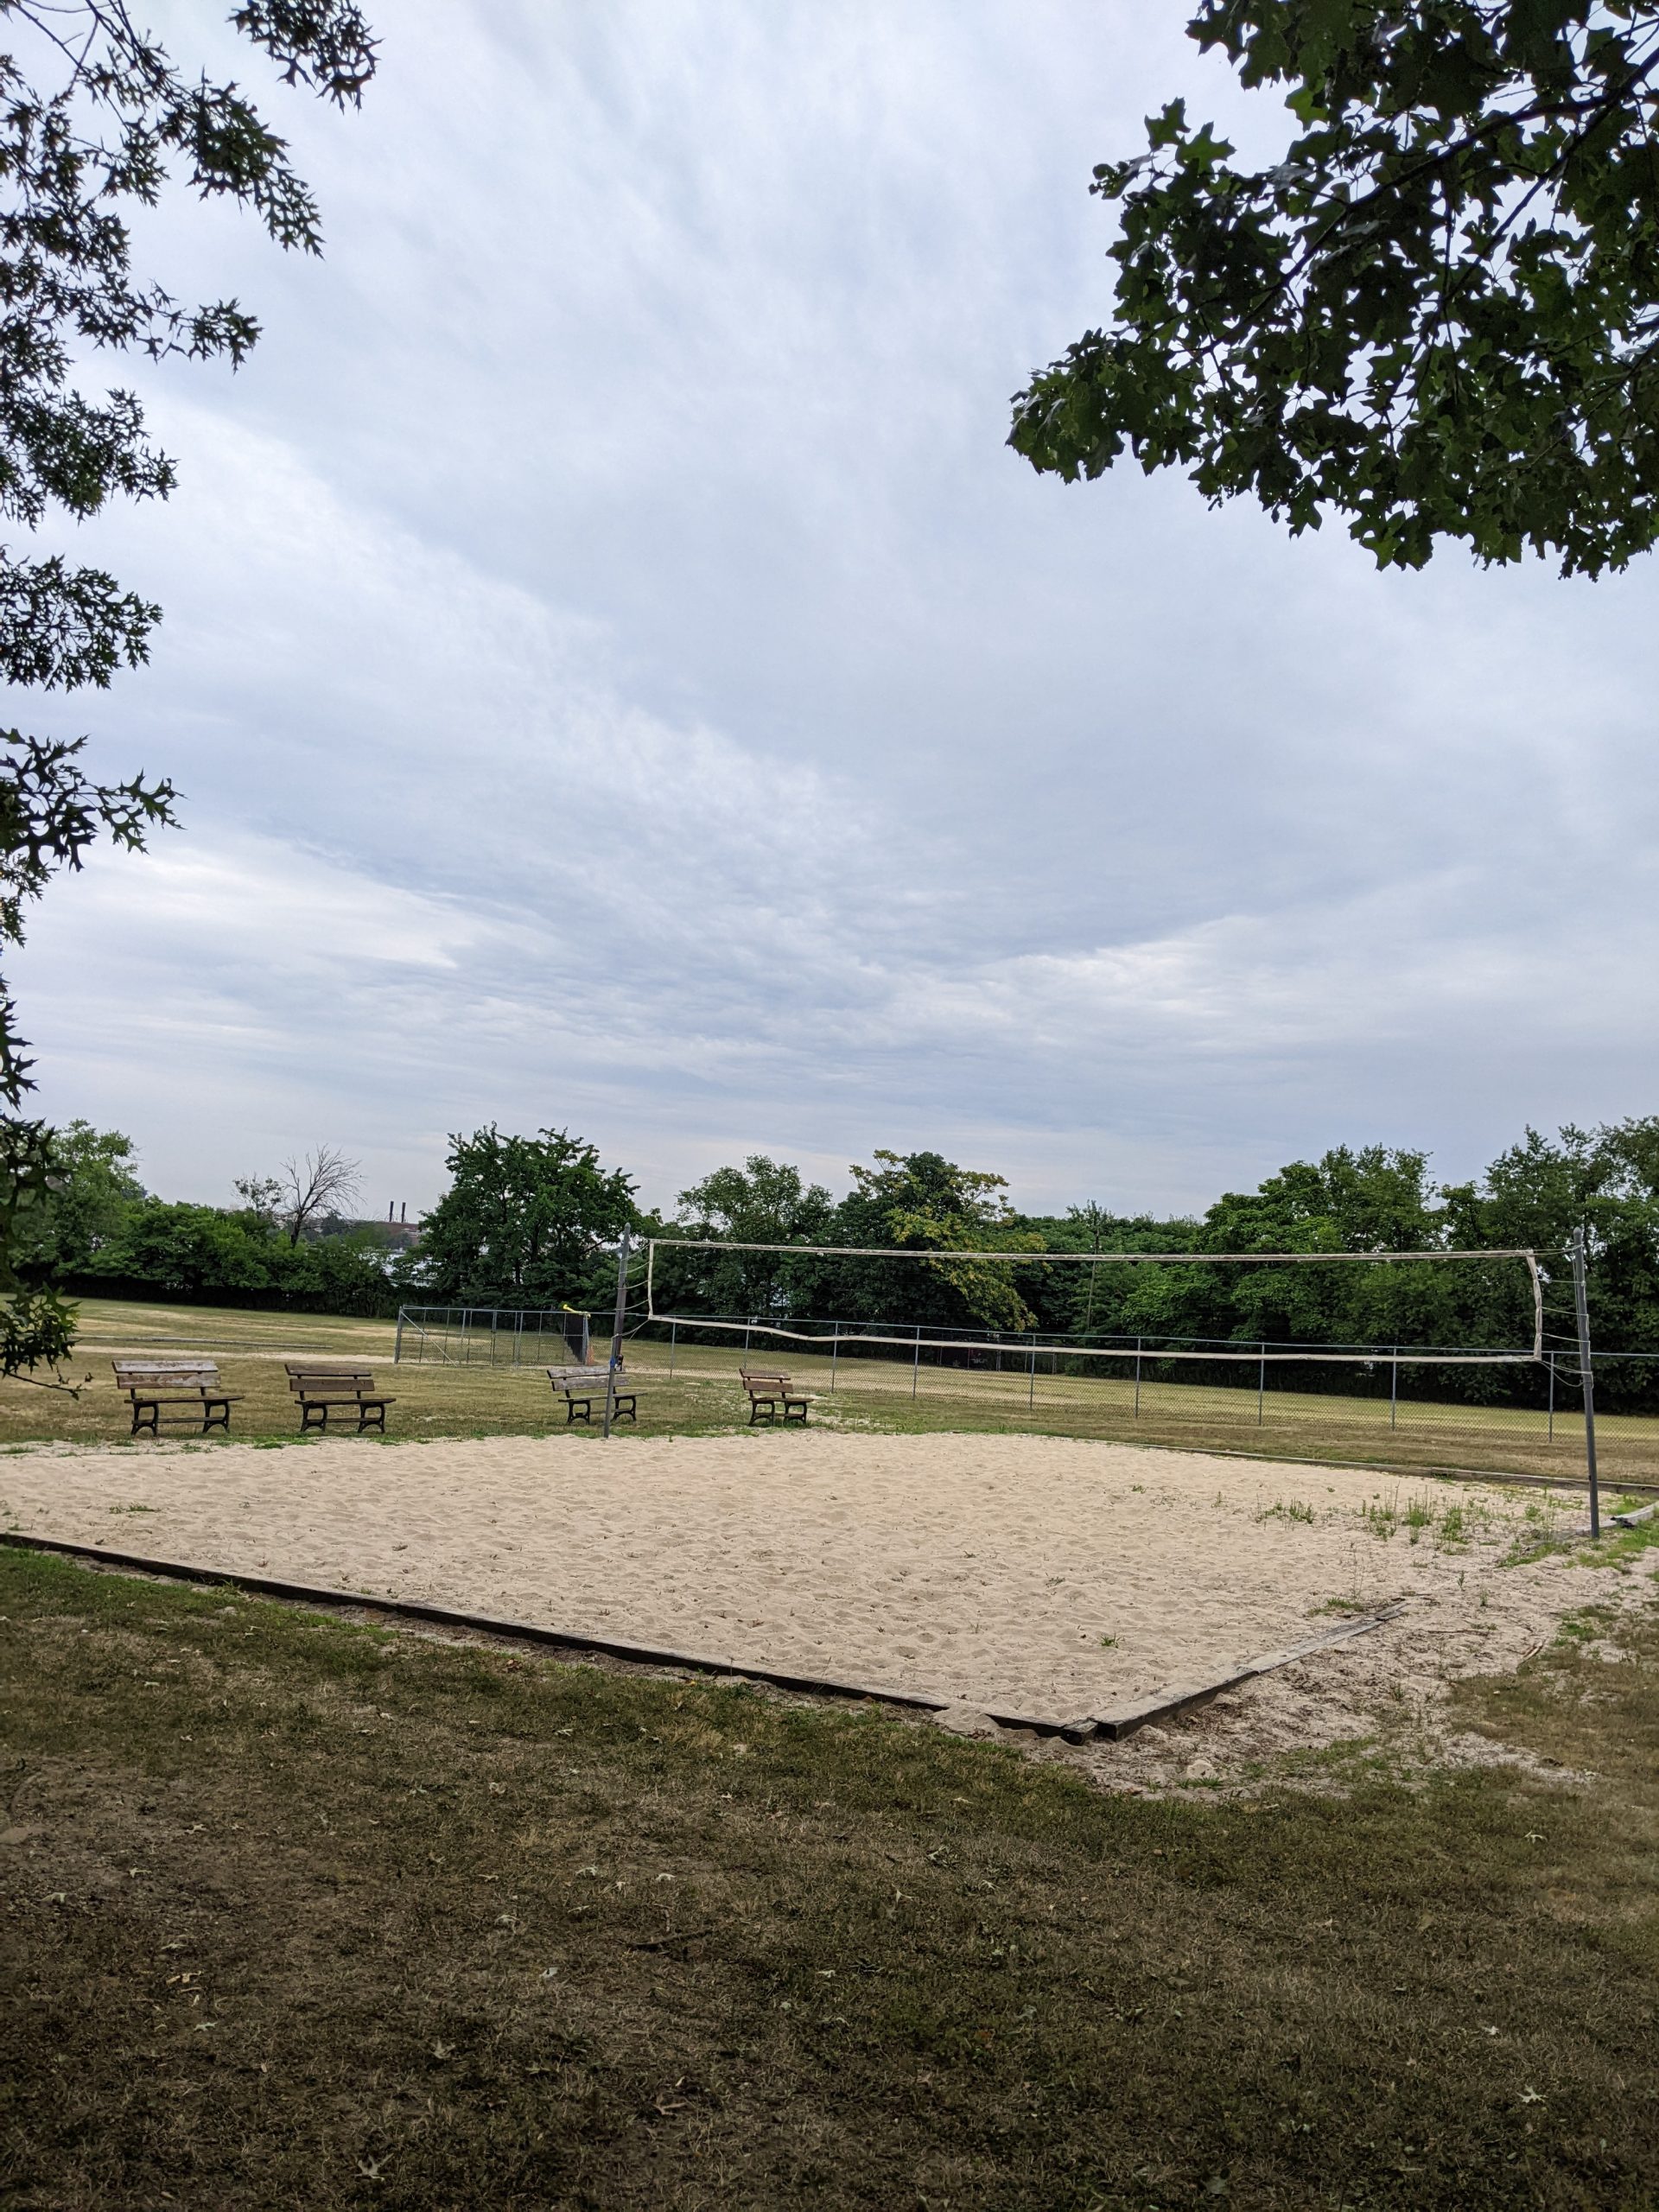 Soupy Island in Deptford NJ - Volleyball Court USE